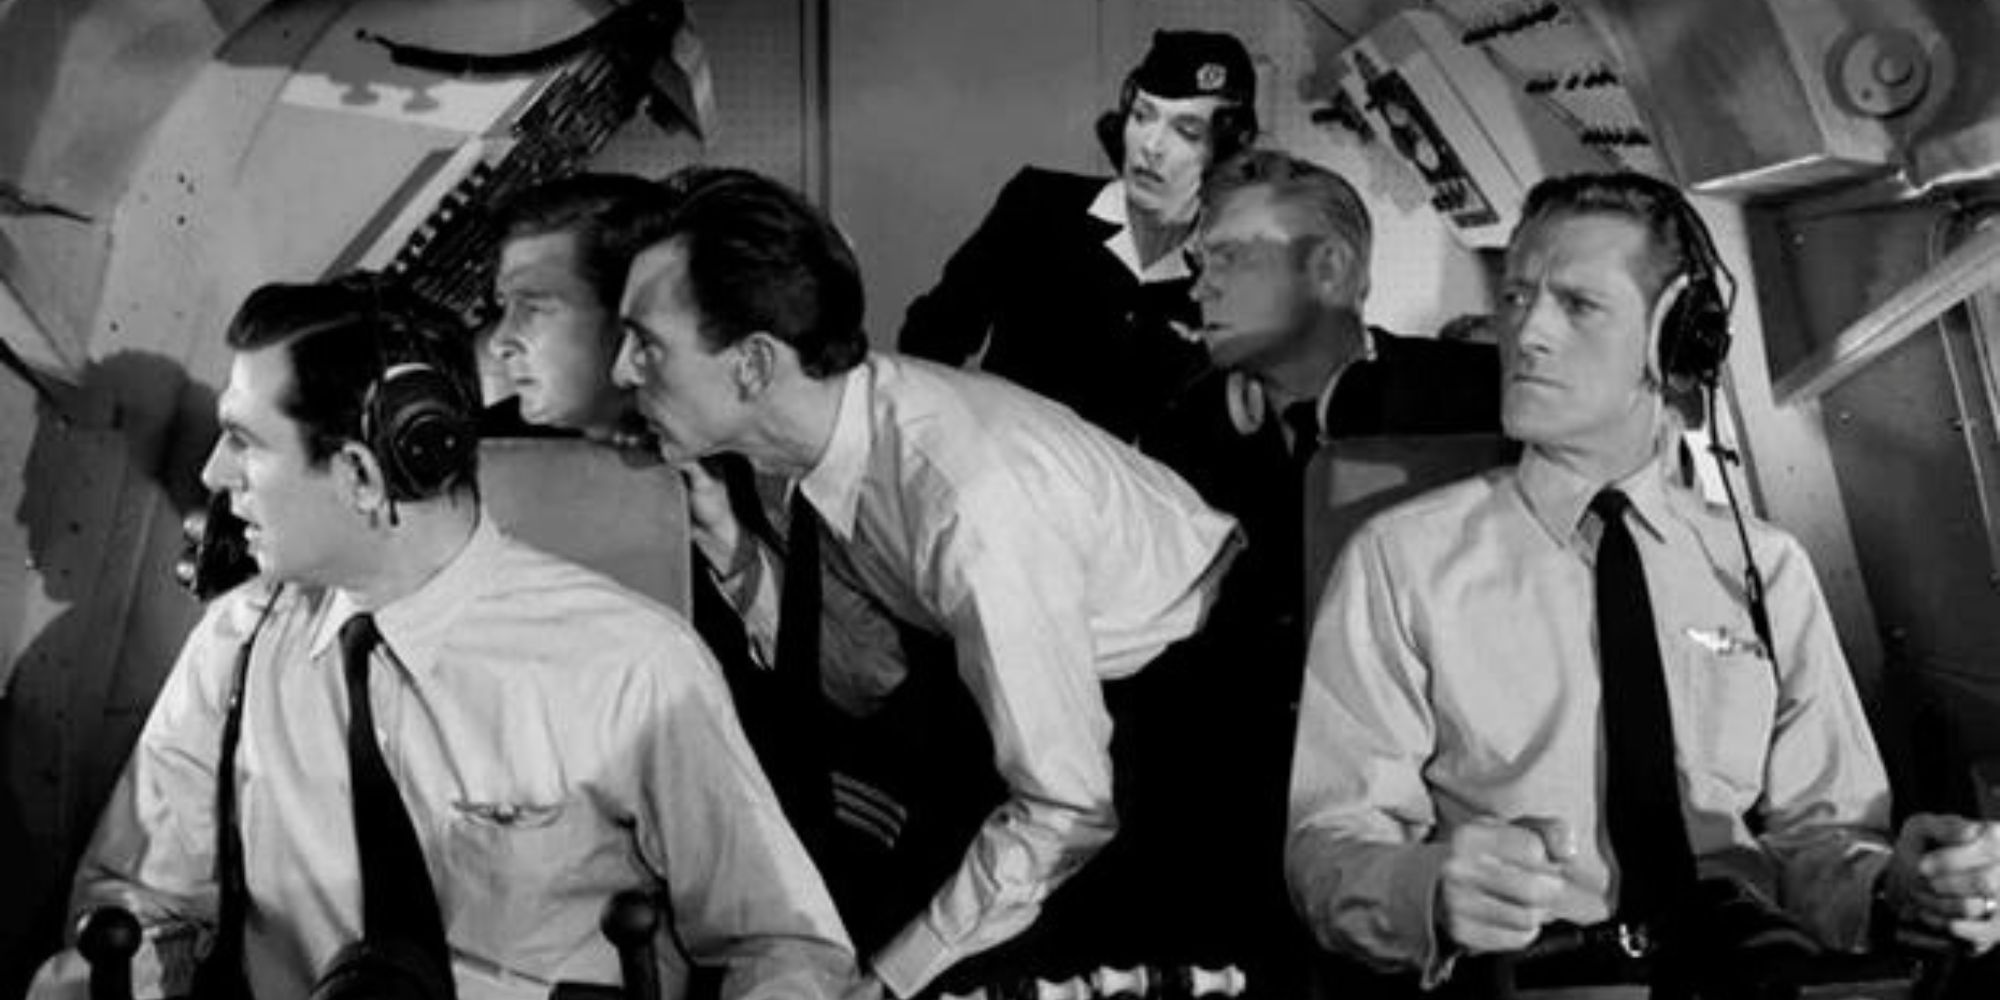 John Anderson, Beverly Brown, Paul Comi, Wayne Heffley, Sandy Kenyon and Harp McGuire all looking out the side of an airplane cockpit in The Twilight Zone